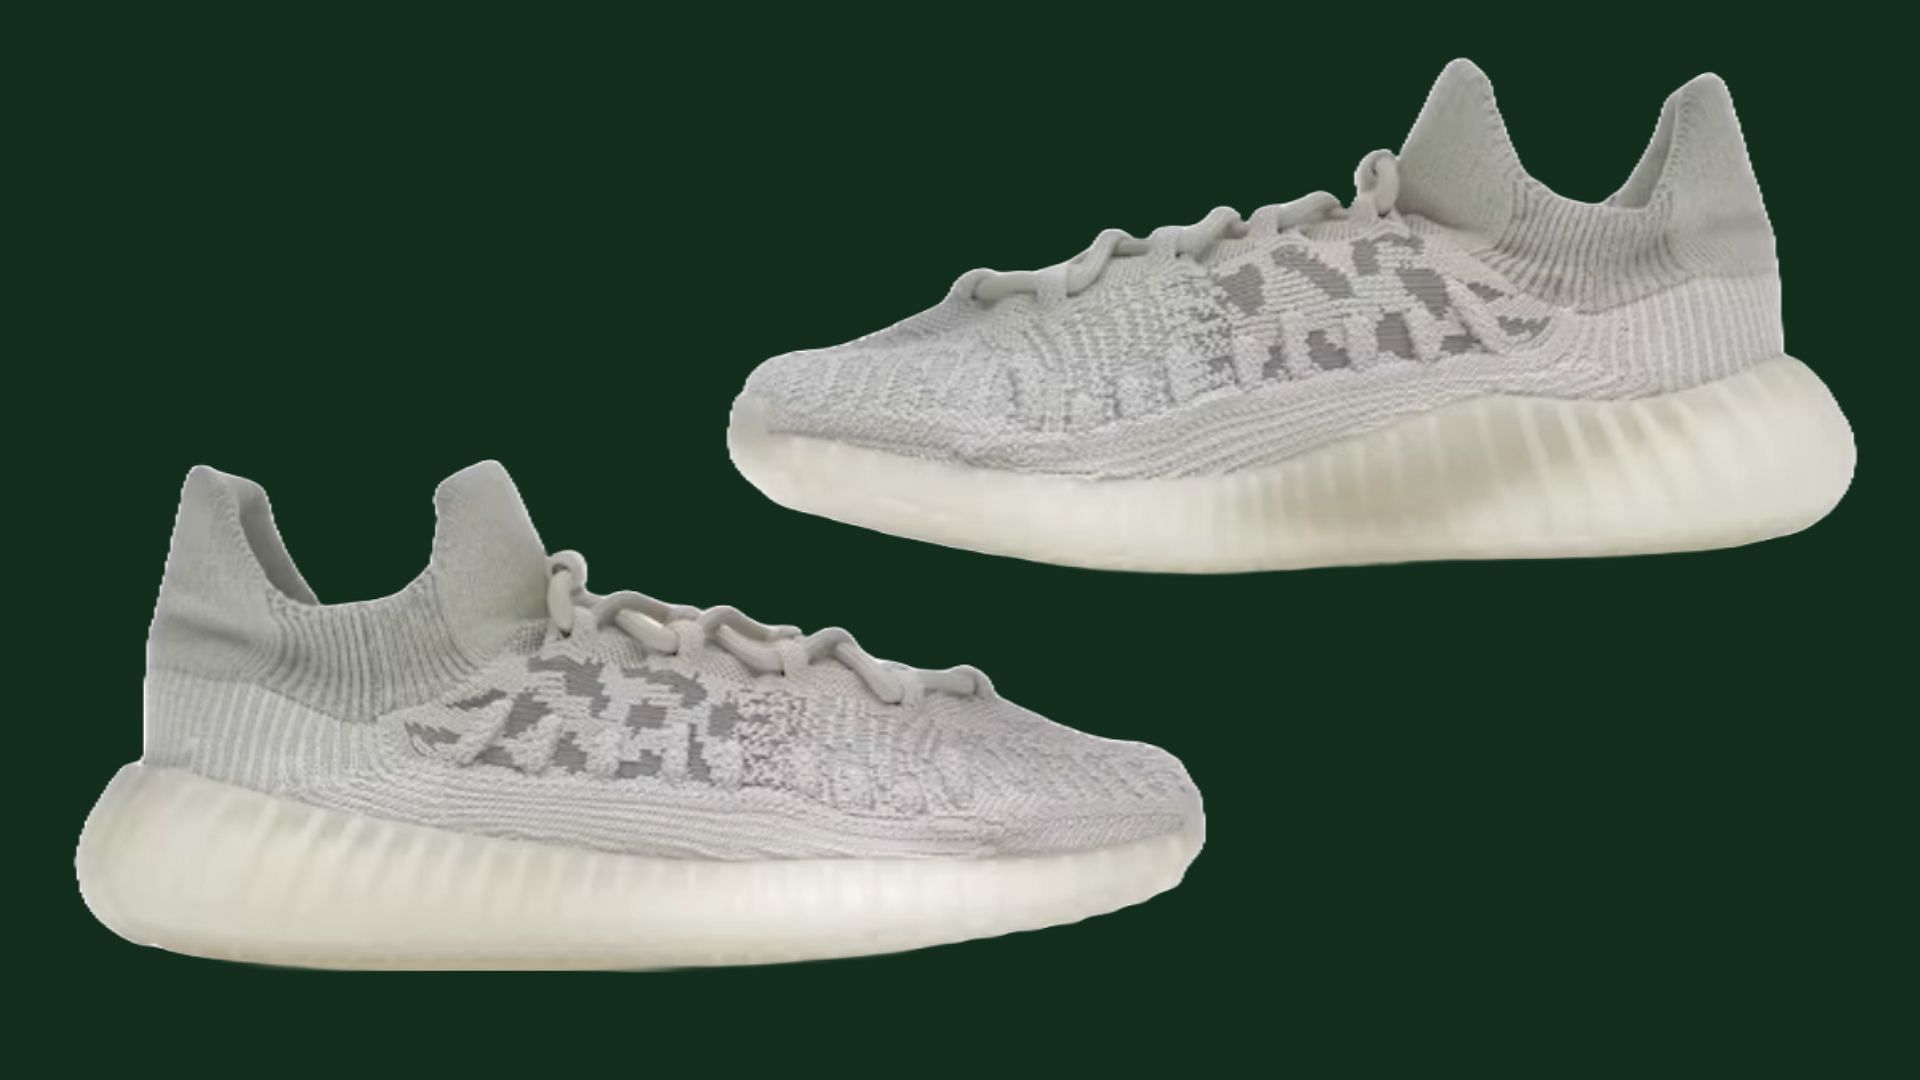 Here is the look of the Adidas Yeezy 350 V2 CMPCT Slate Bone (Image via Adidas)